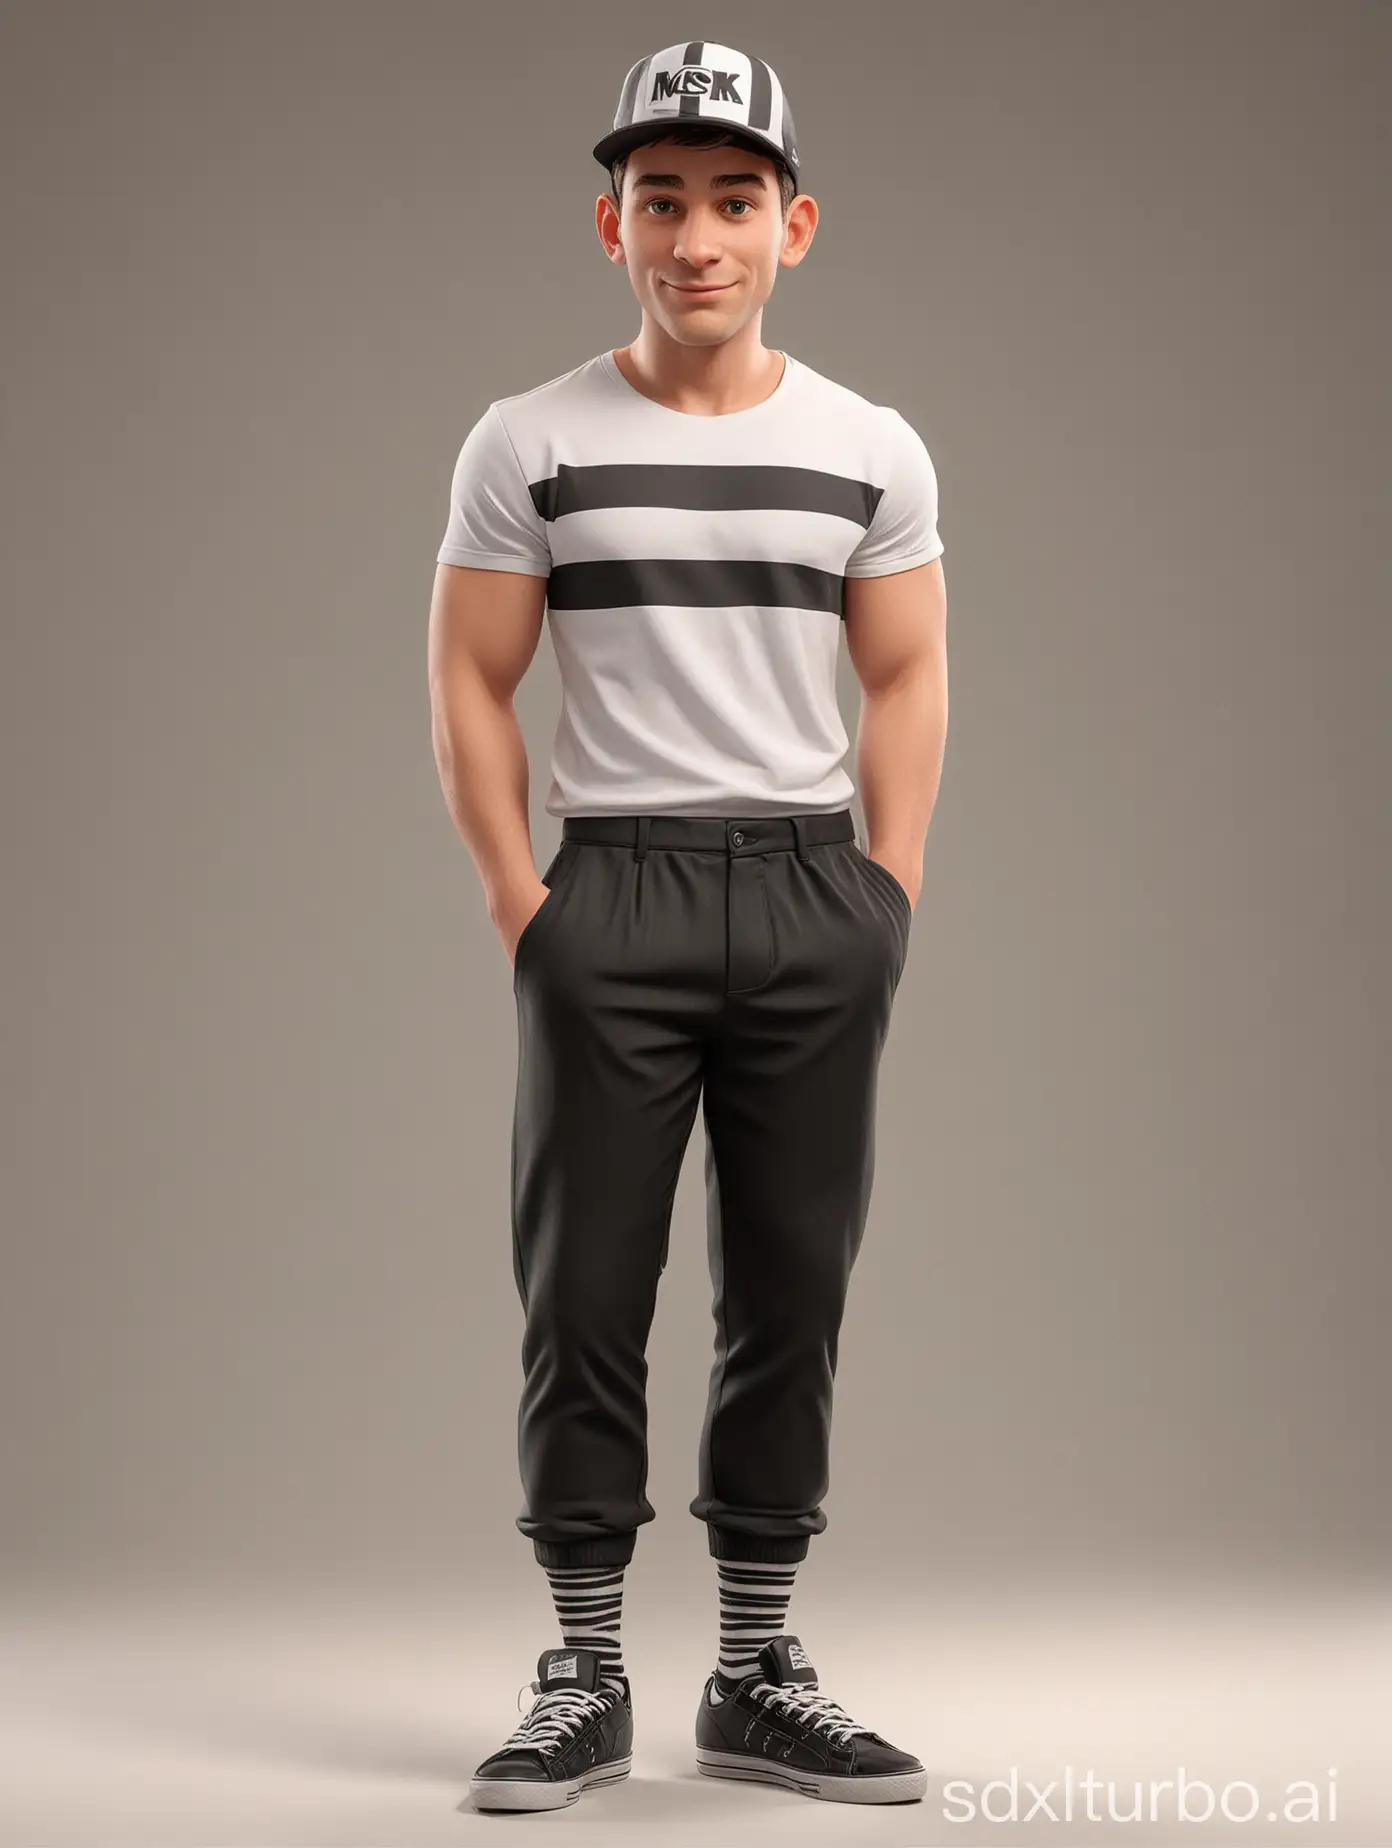 Create a realistic caricature 3D Cartoon style full body with a big head. A young man standing with proud pose. Thin body, wearing black cap, white t-shirt lettering 'MK studio', black trousers. Wearing black shoes combined with a black and white striped socks. Peach solid Colored background. Use soft photography lighting, top lighting, side lighting. high resolution images, Uhd, 16k.